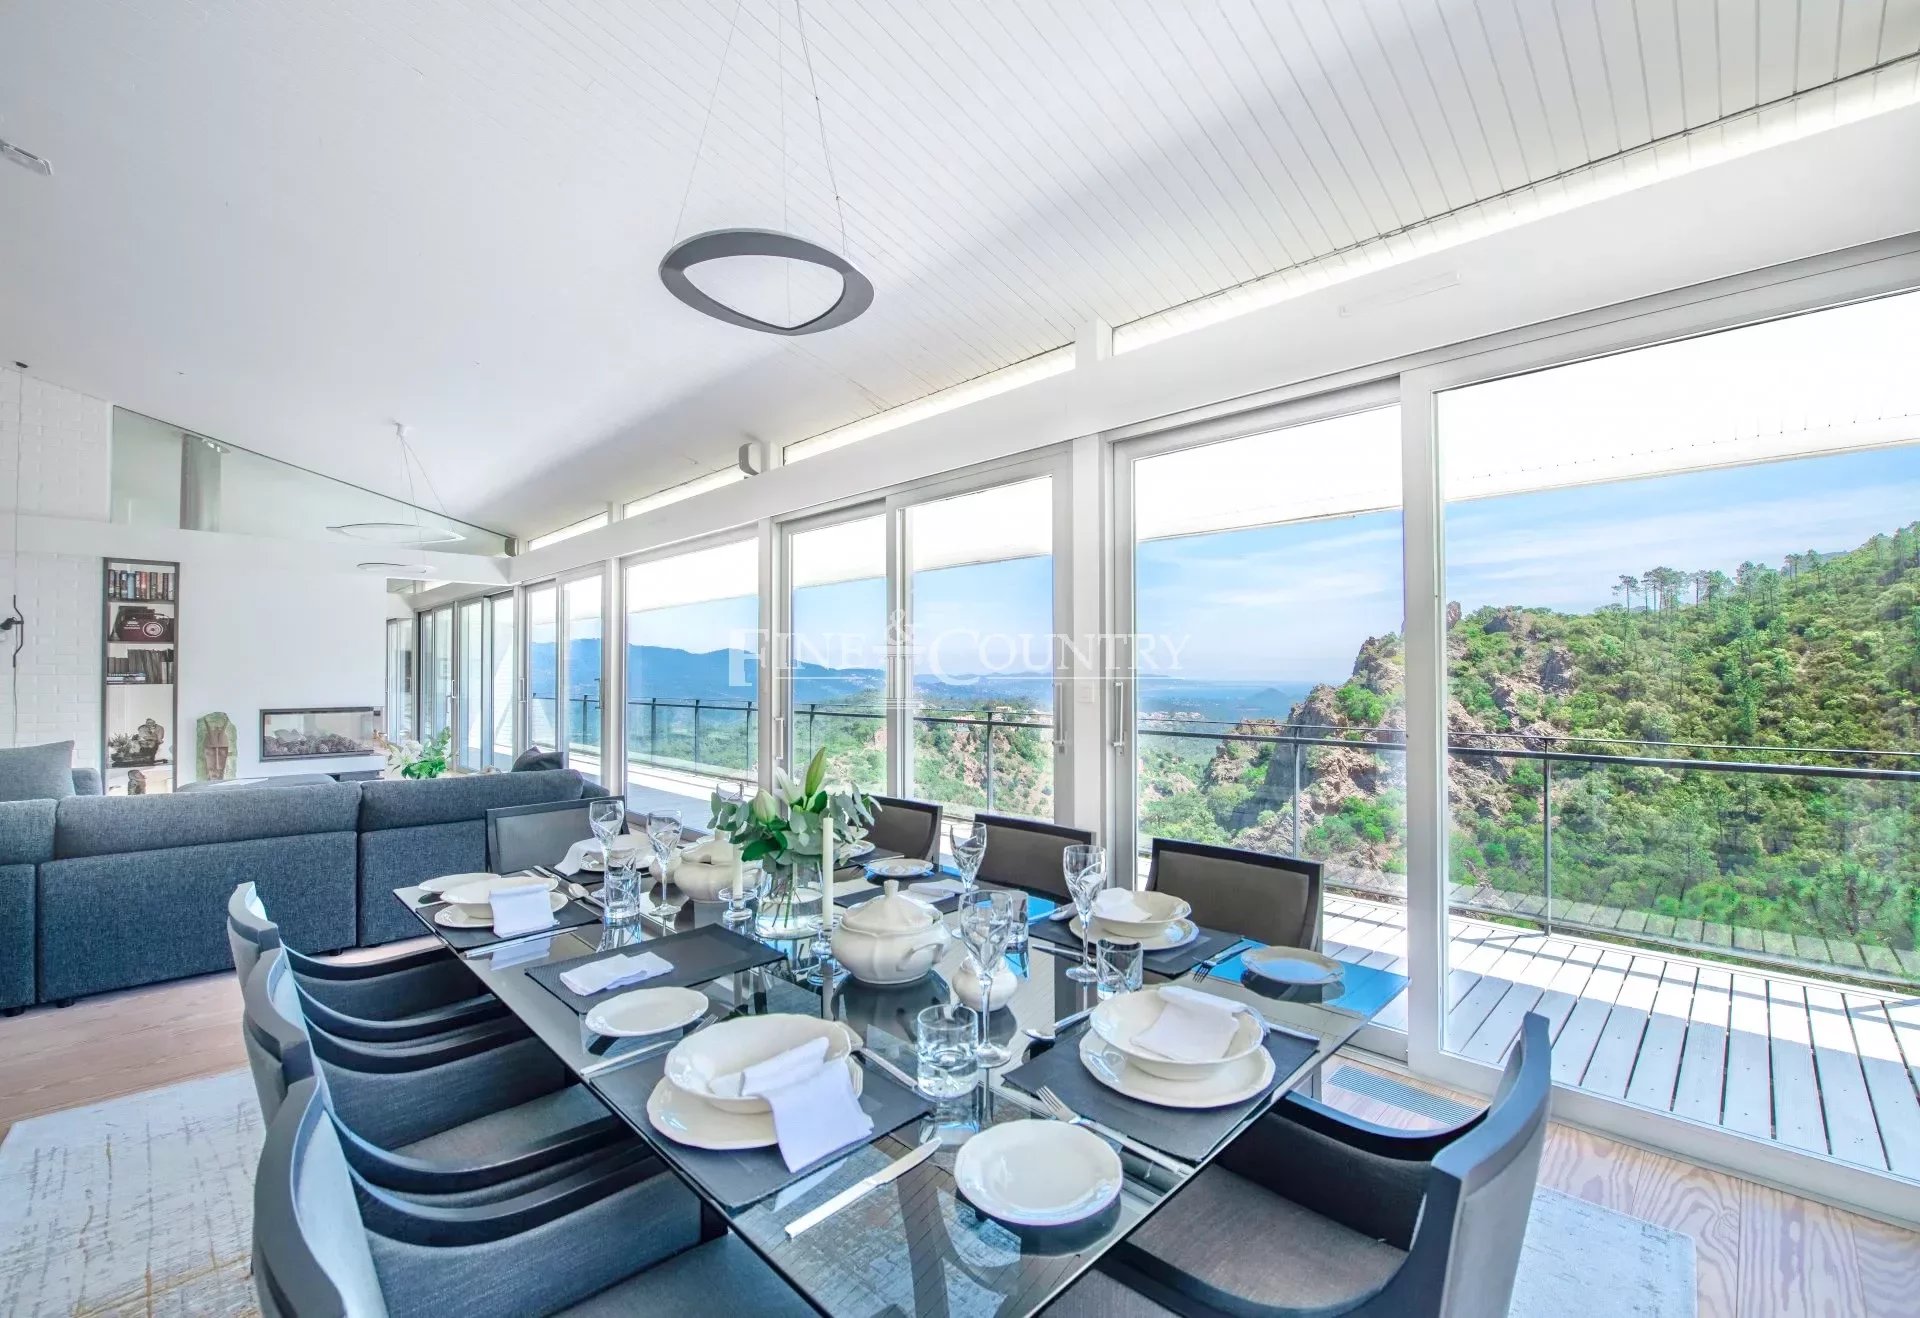 Contemporary Villa for sale in the hills above Cannes